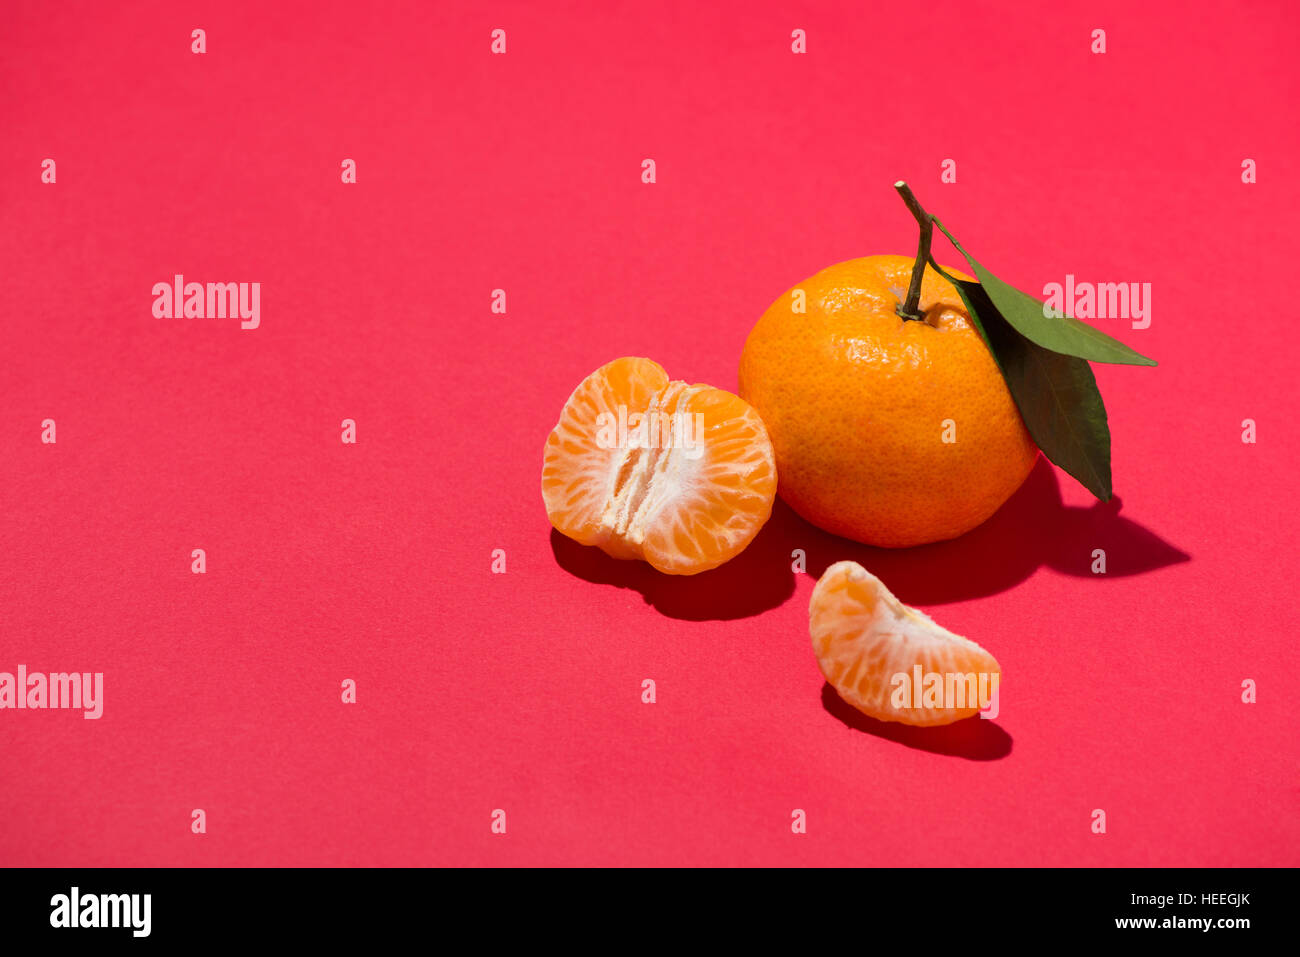 Orange for Lunar Chinese new year. Tet Holiday Concept. Stock Photo